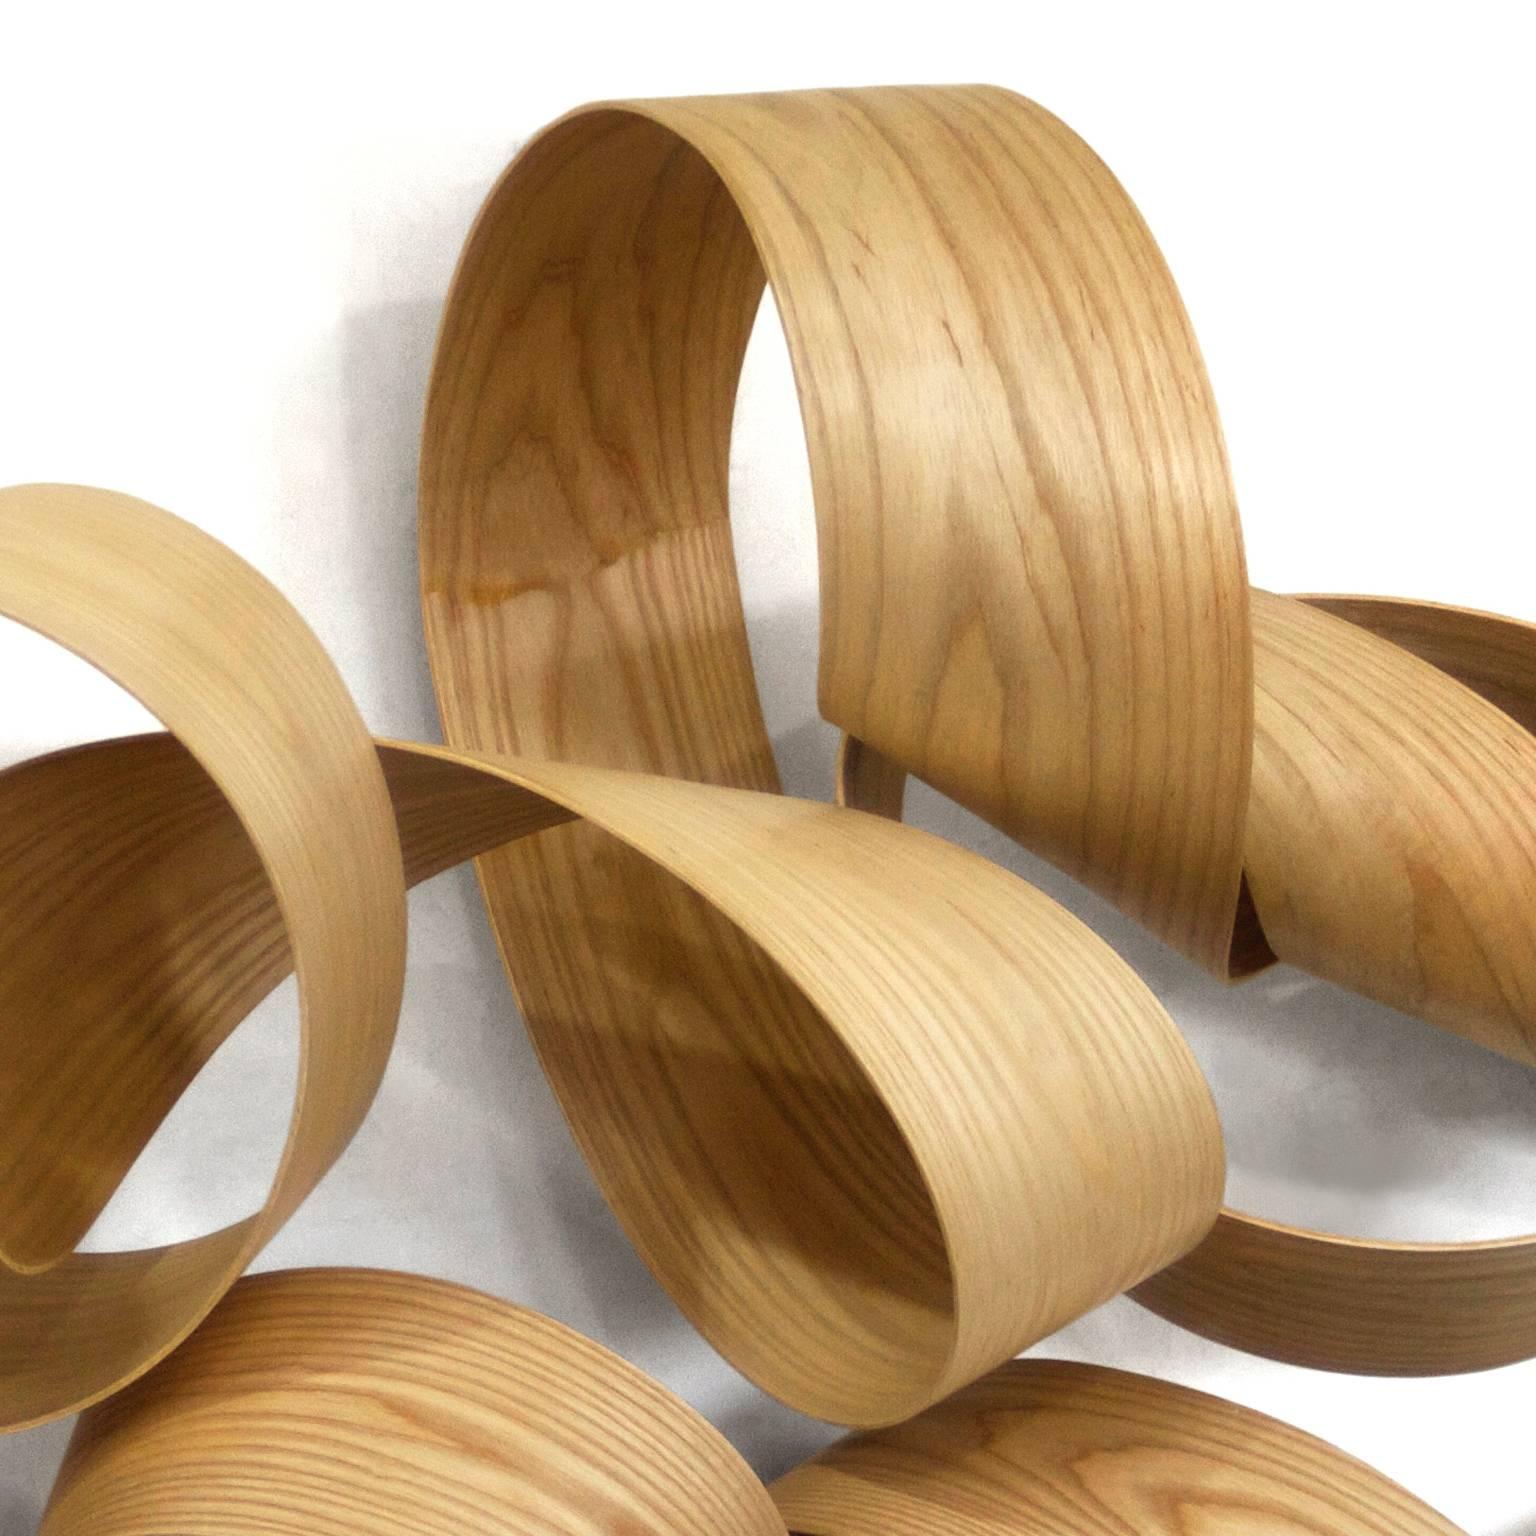 A beautiful ribbon of natural wood this wall mounted sculpture is contemporary yet lyrical and compliments a variety of decors. Sculptor Jeremy Holmes' curving twisting creations range in scale from modestly sized free standing sculptures to gravity